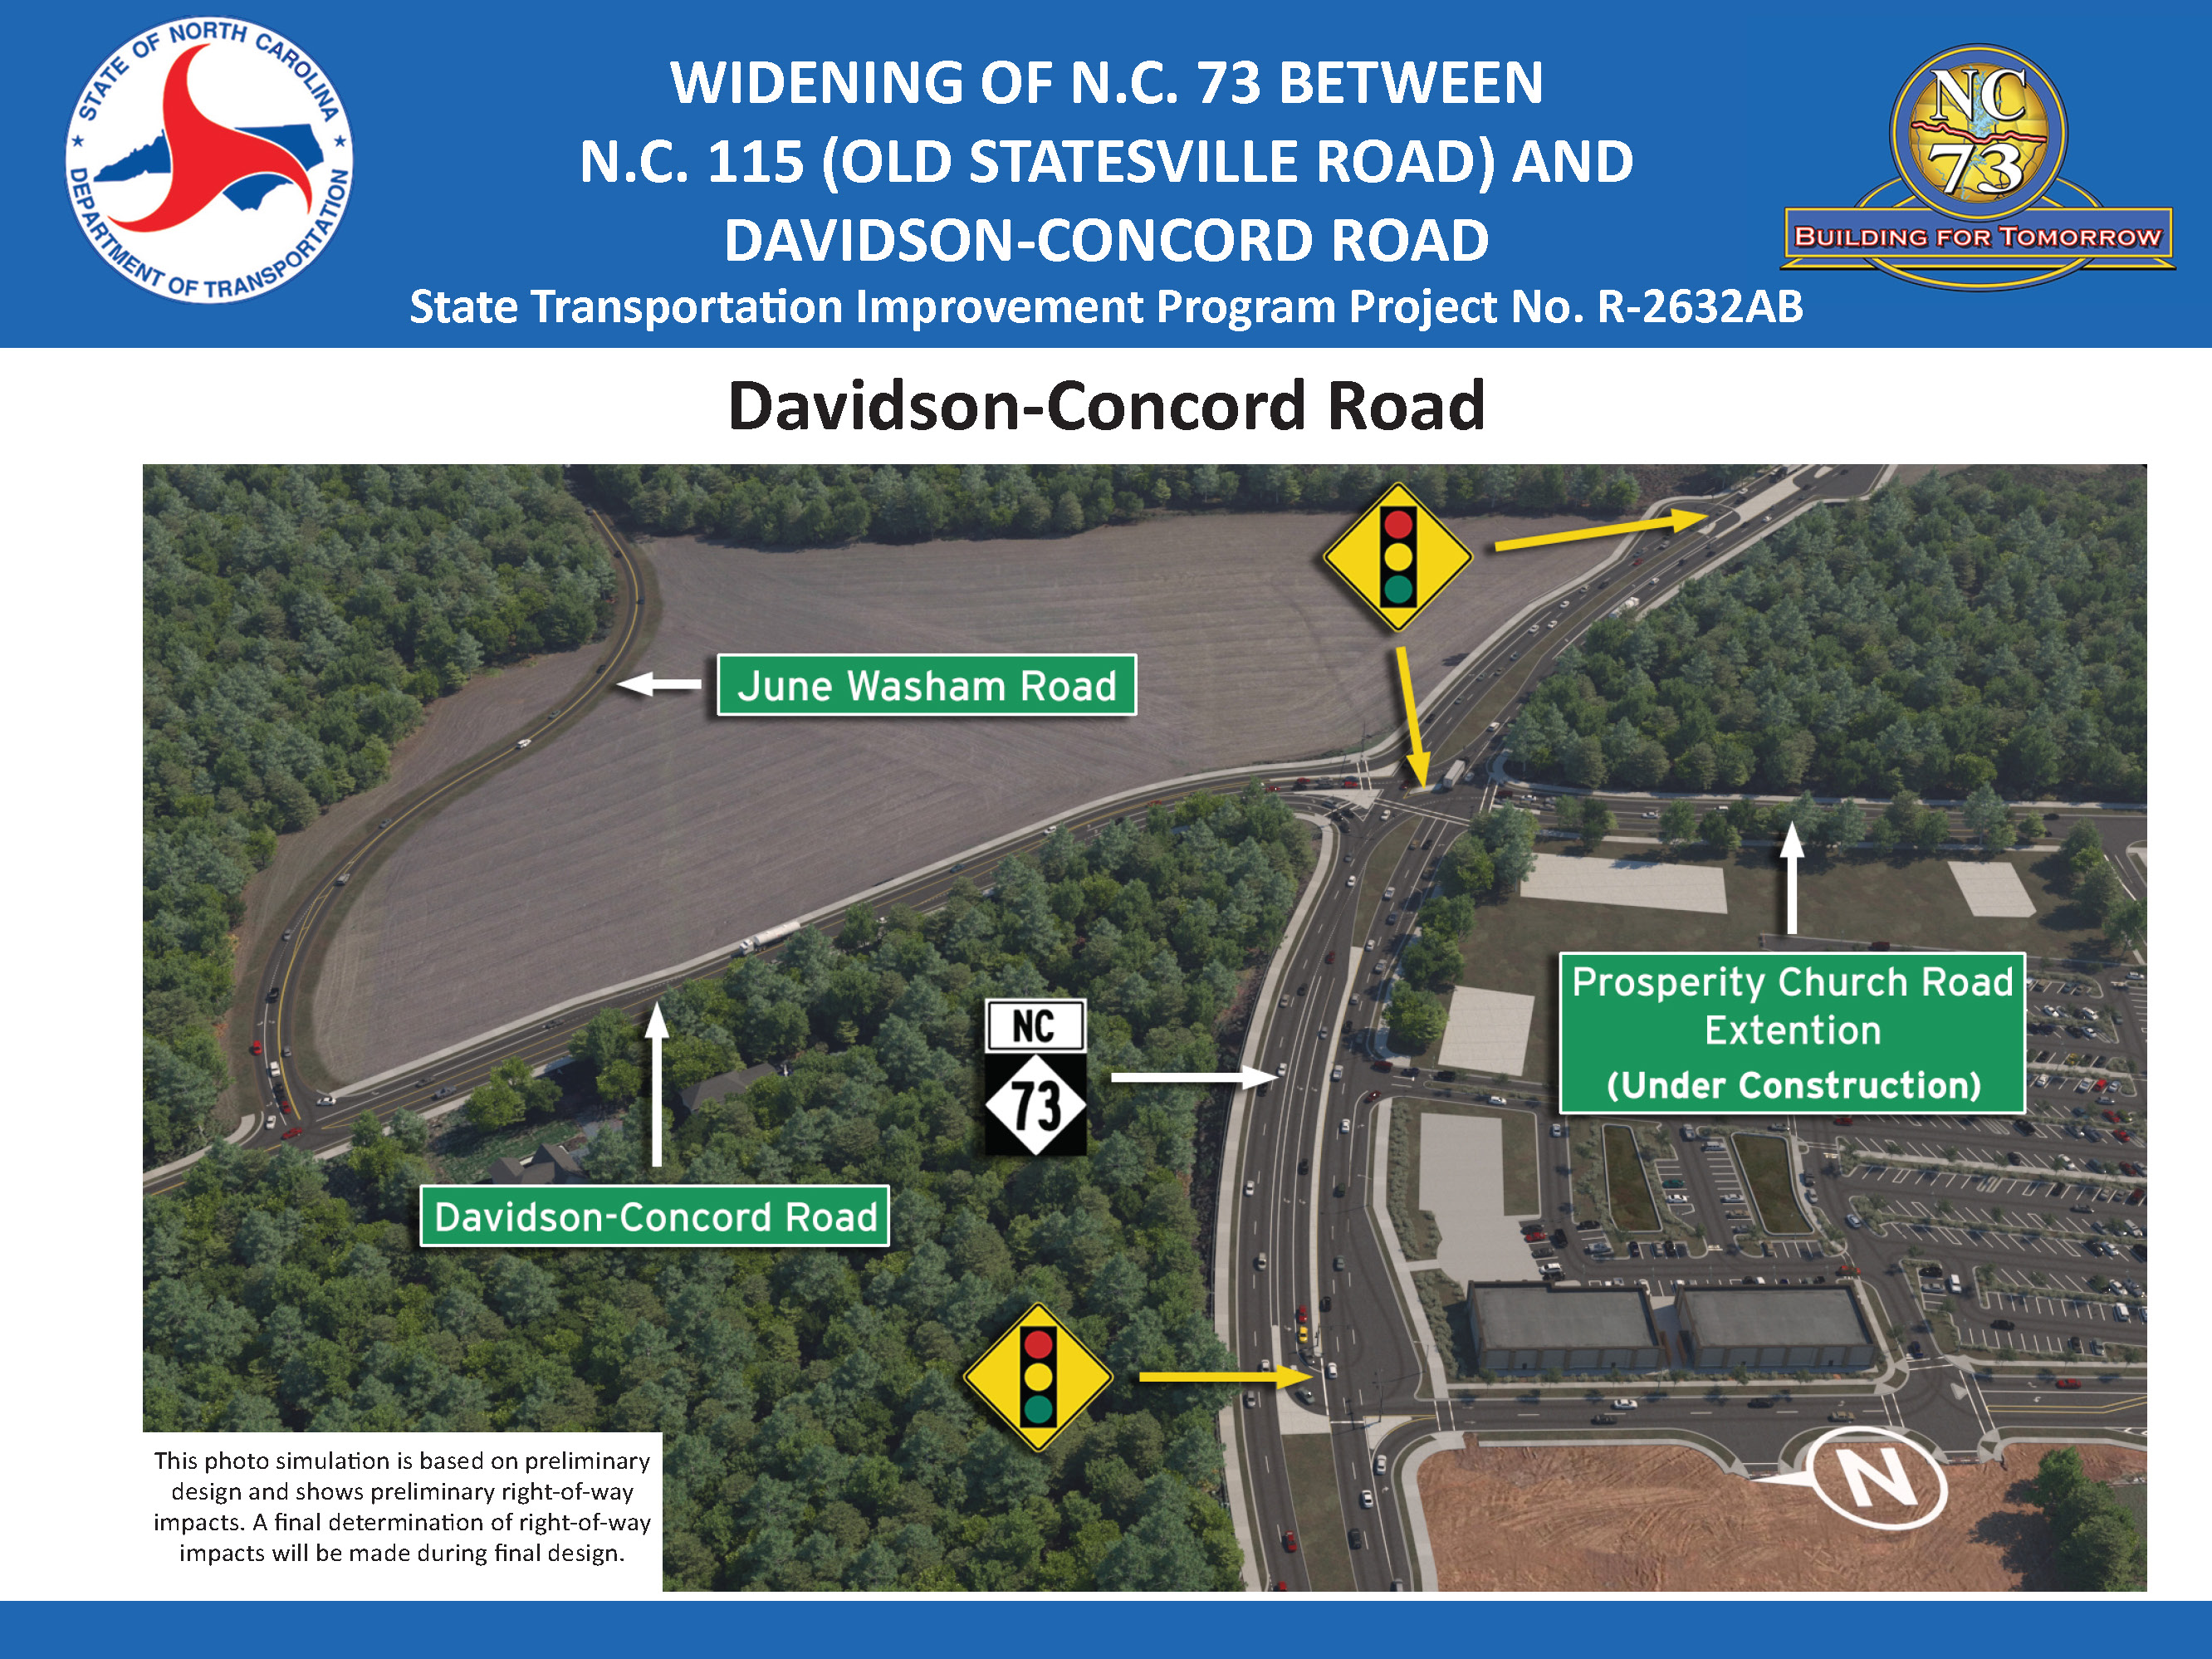 Widening of N.C. 73 Between N.C. 115 (Old Statesville Road) and Davidson-Concord Road